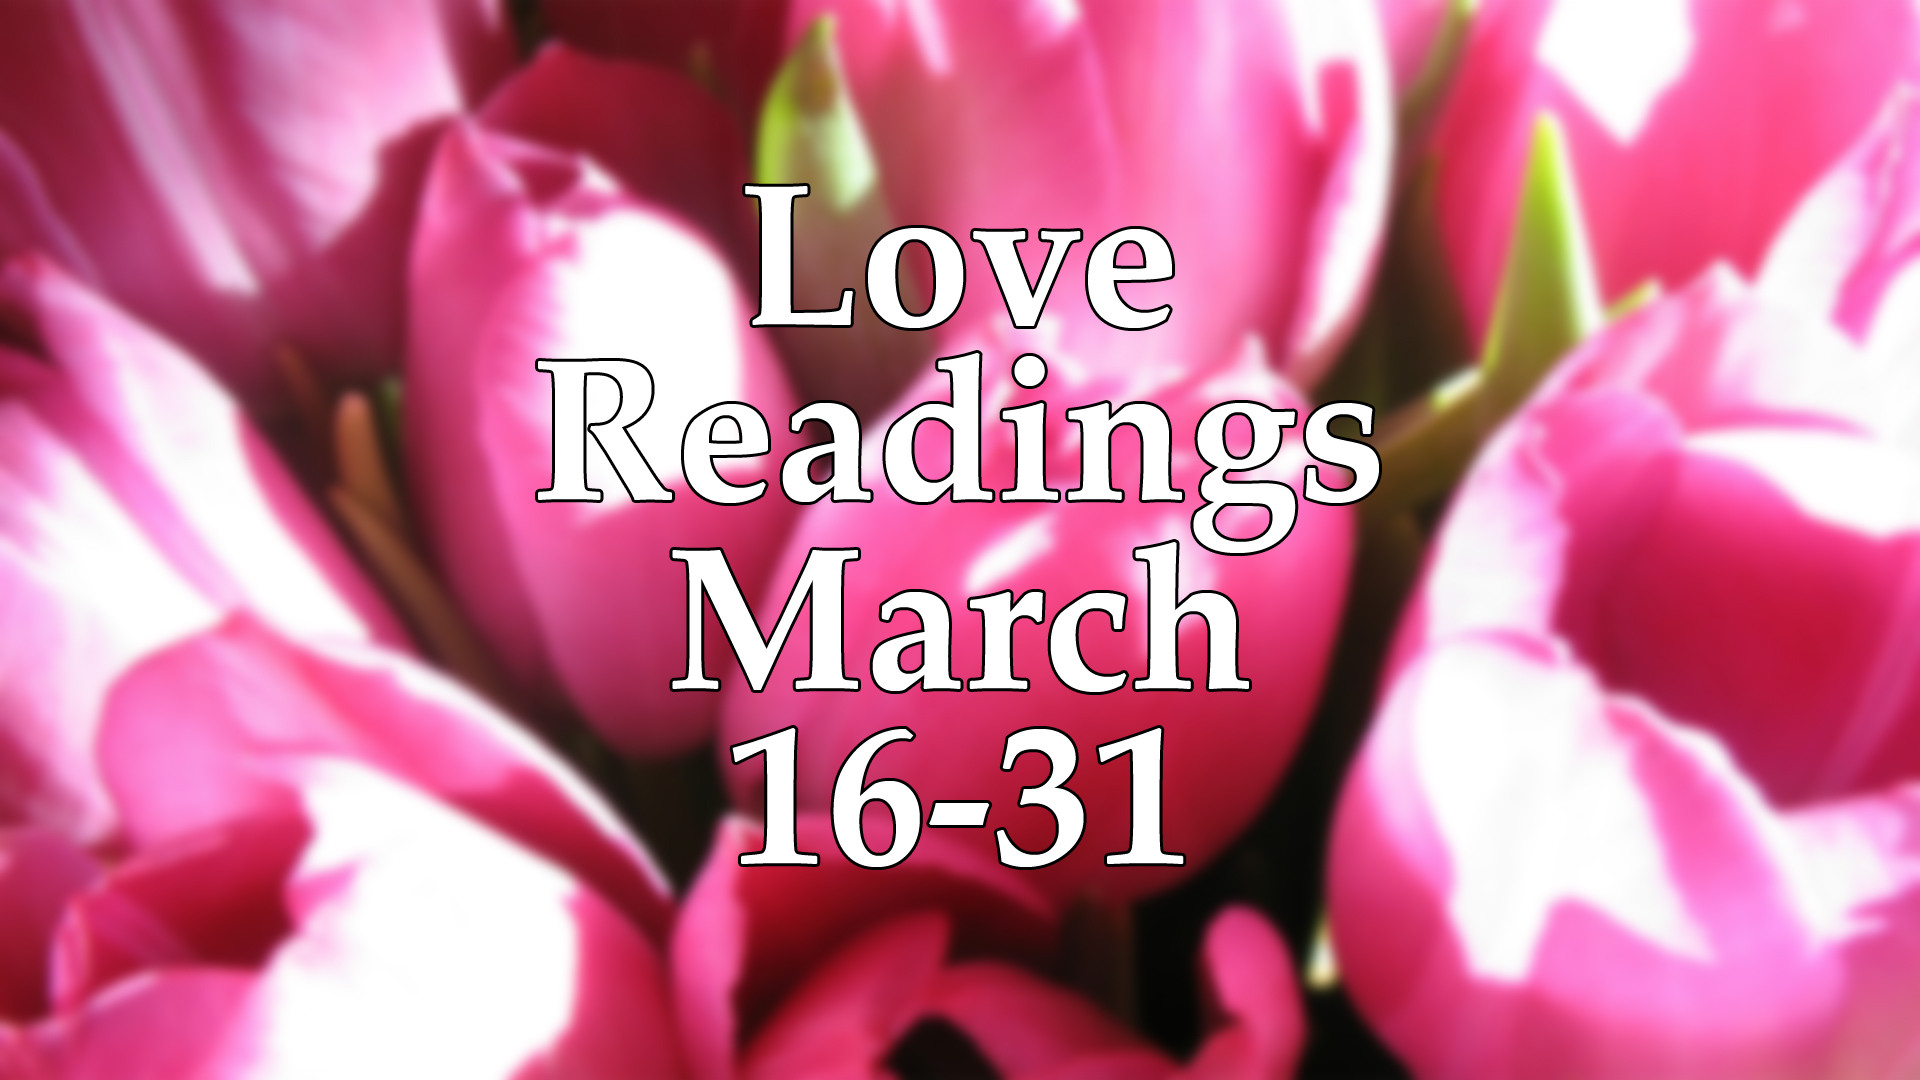 Love Readings March 16-31 2017